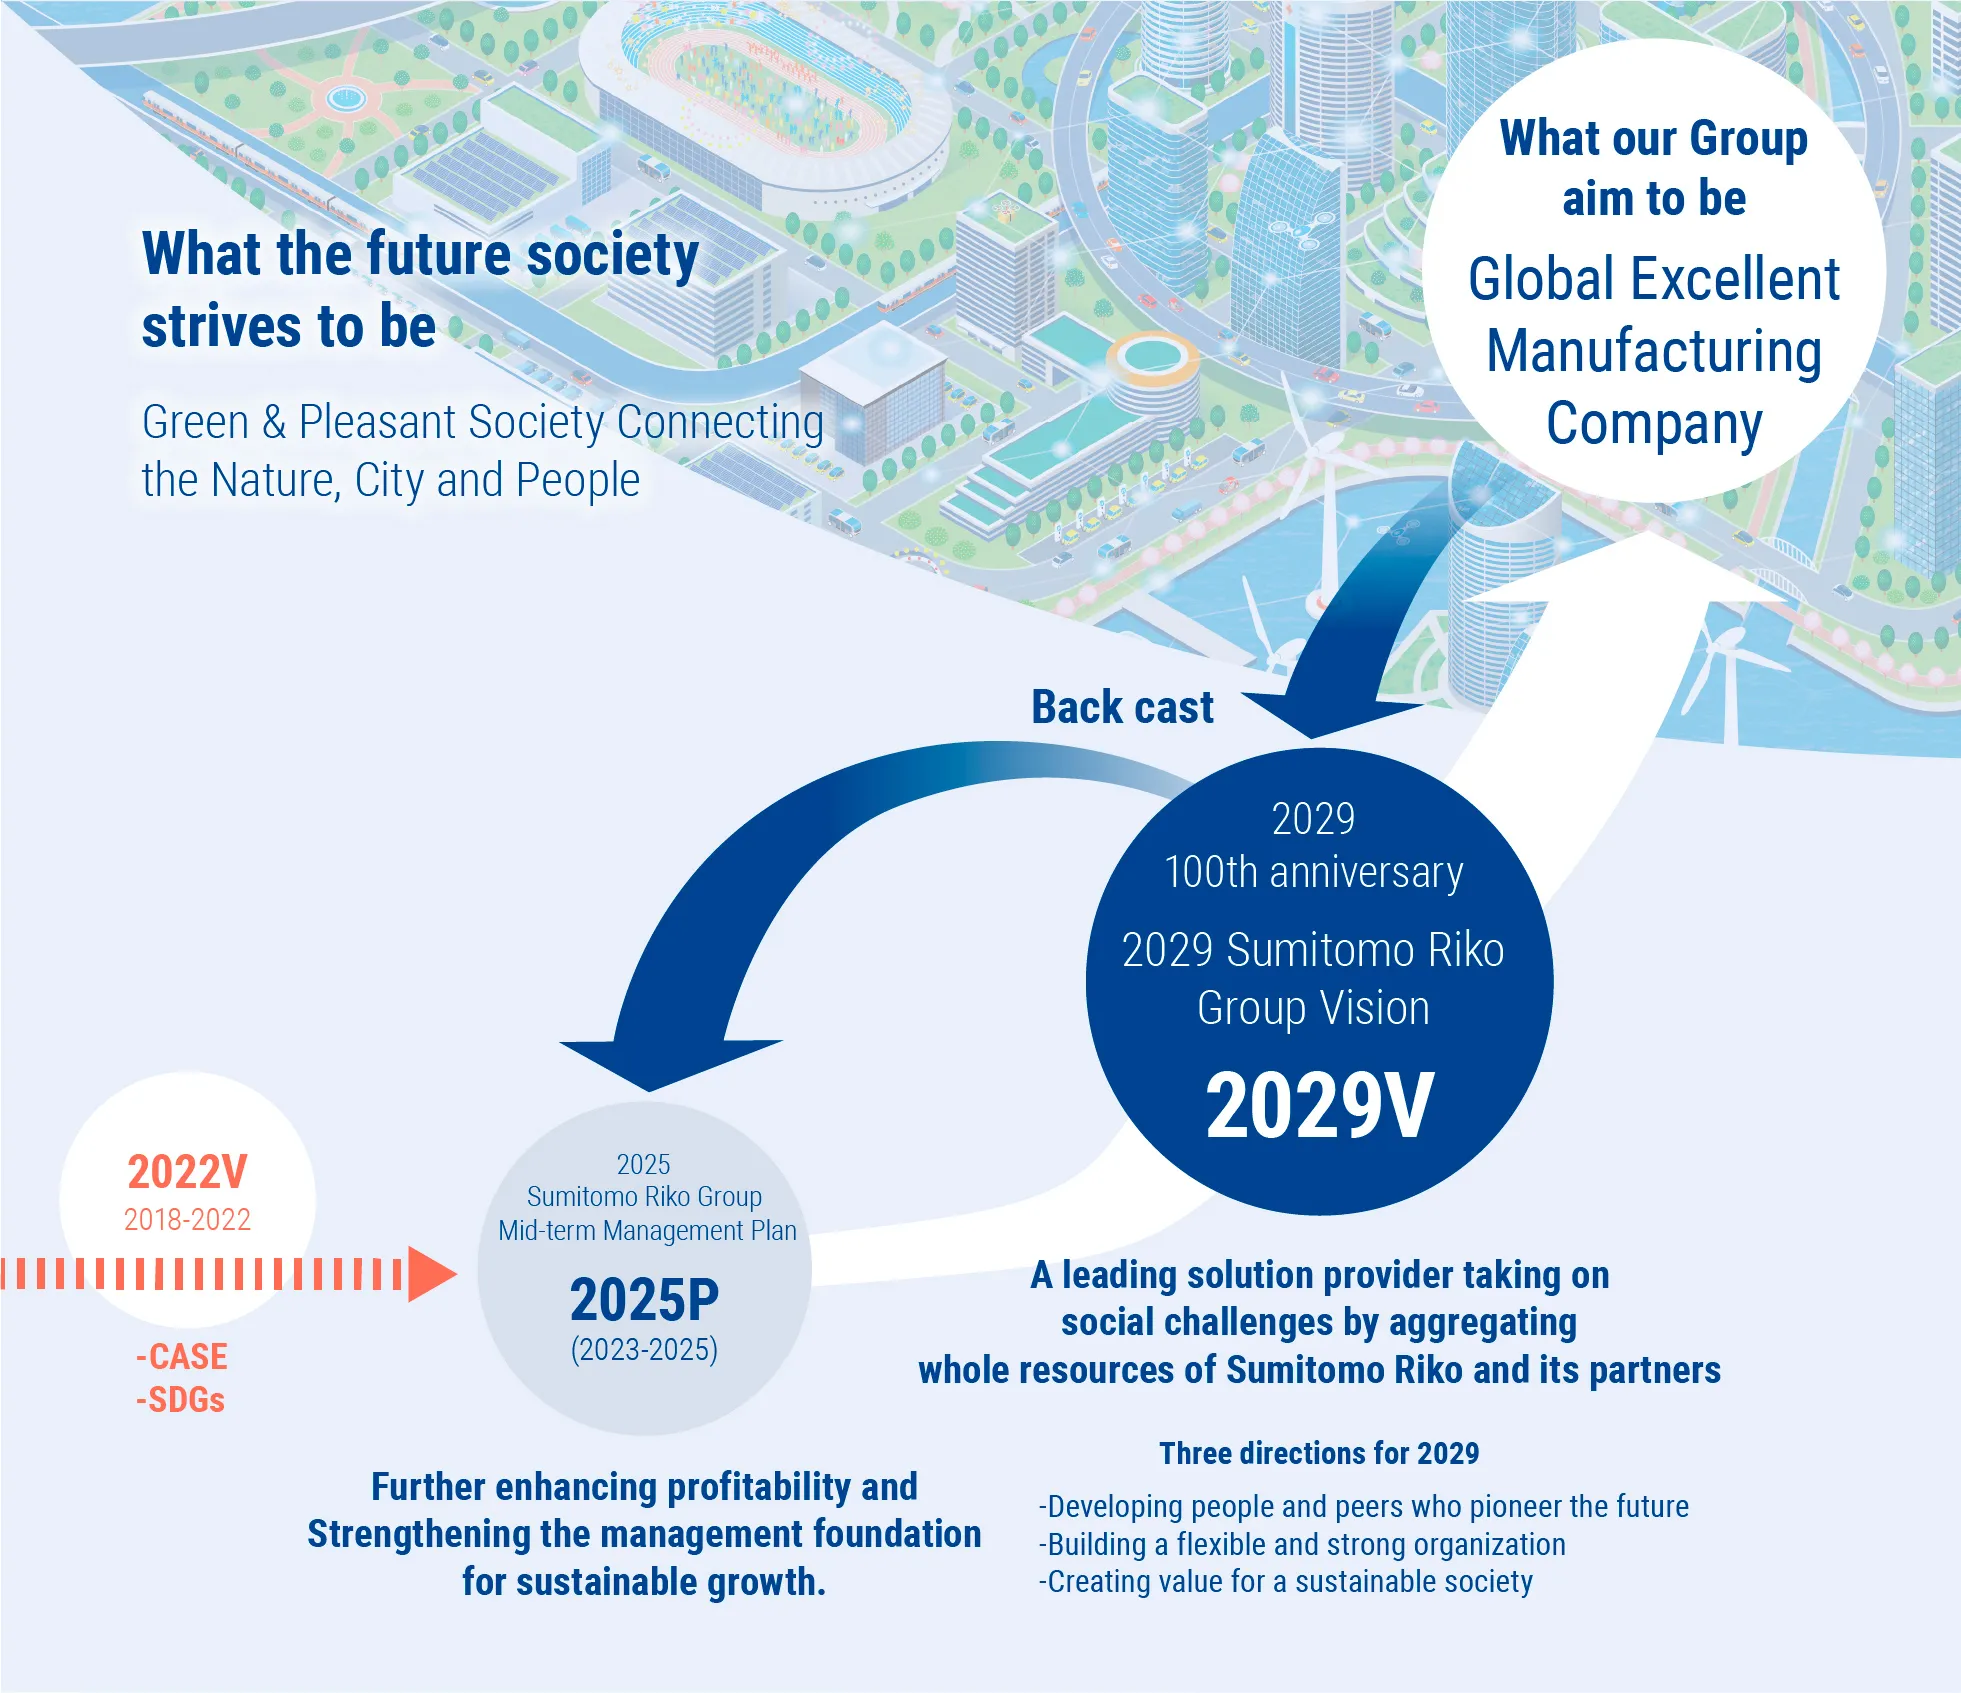 2029 Sumitomo Riko Group Vision, and Approach to the 2025 Mid-Term Management Plan